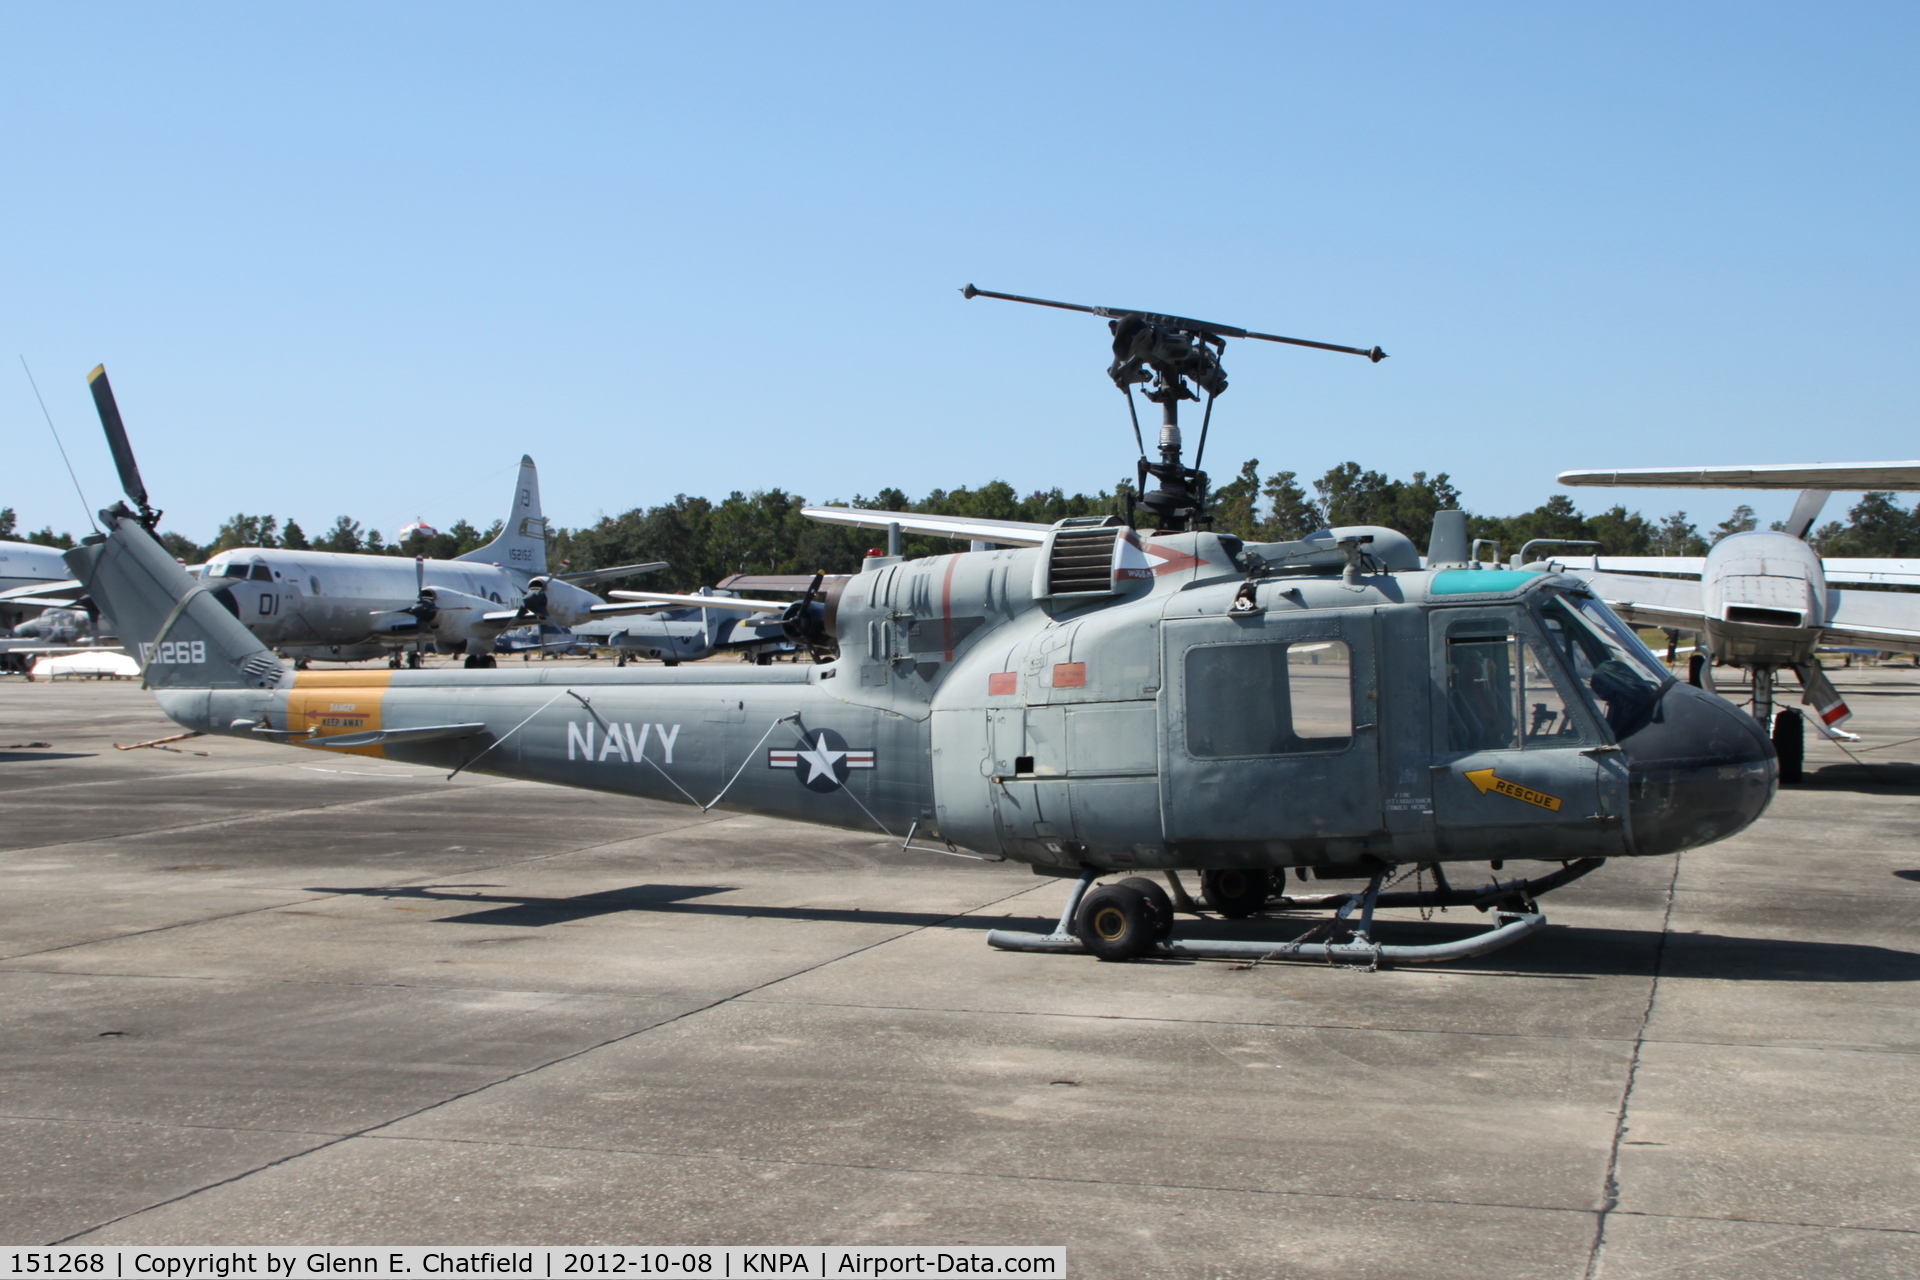 151268, 1964 Bell UH-1E Iroquois C/N 6003, Naval Aviation Museum